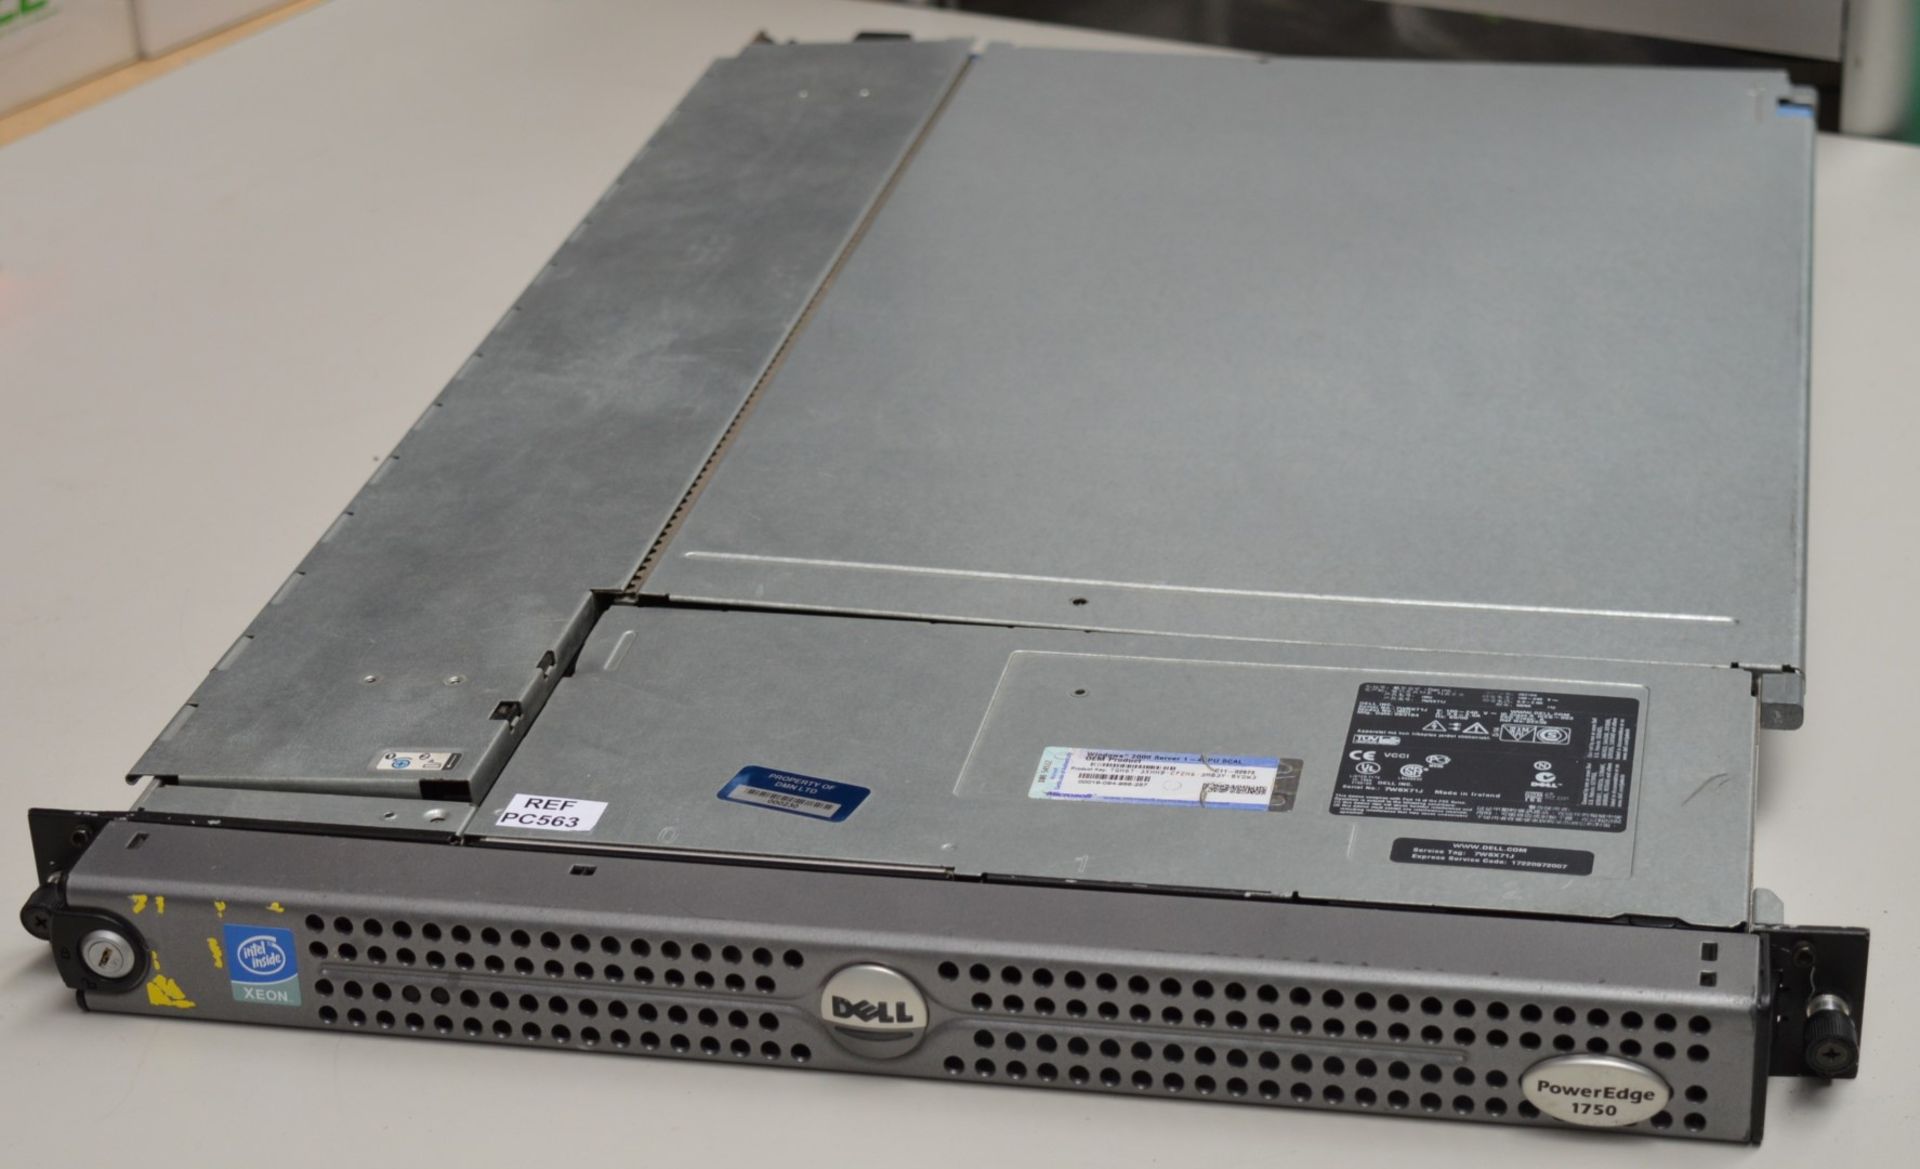 1 x Dell Power Edge 1750 Business Server - Dual Xeon Processors and 1gb Ram - Hard Disk Drives